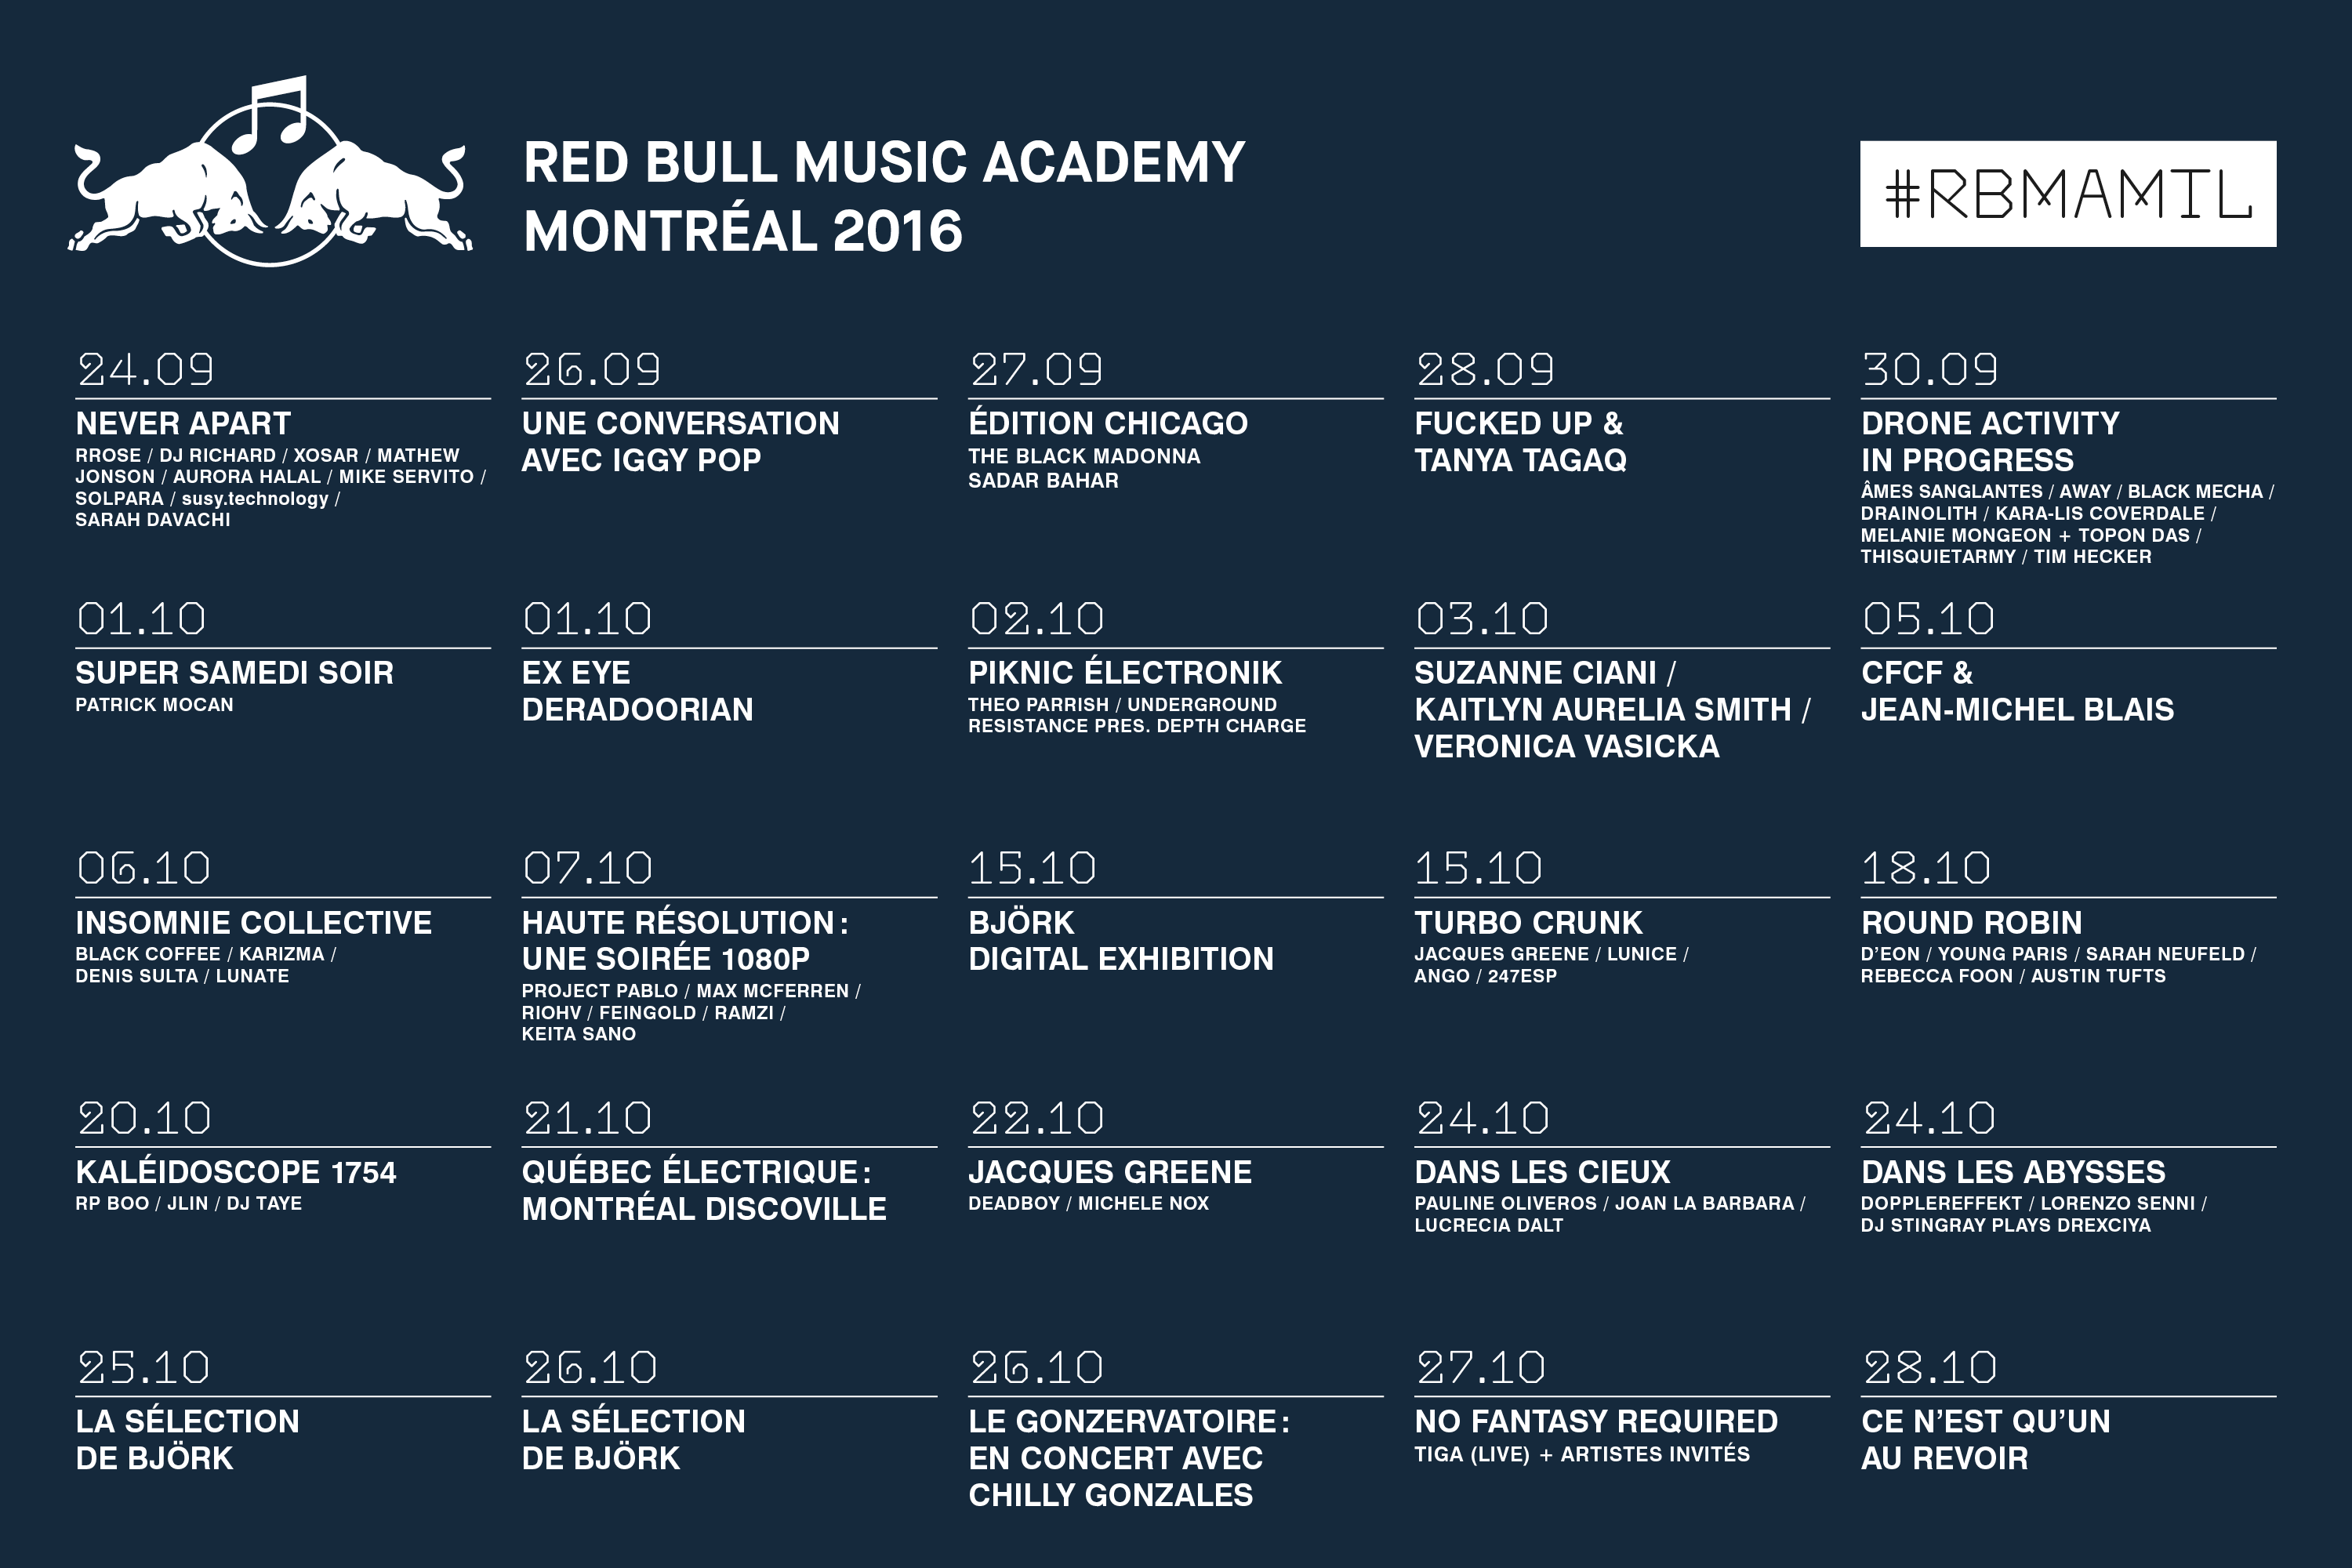 RBMA will touch down in Montreal for the exploration of Canadian and international music culture,